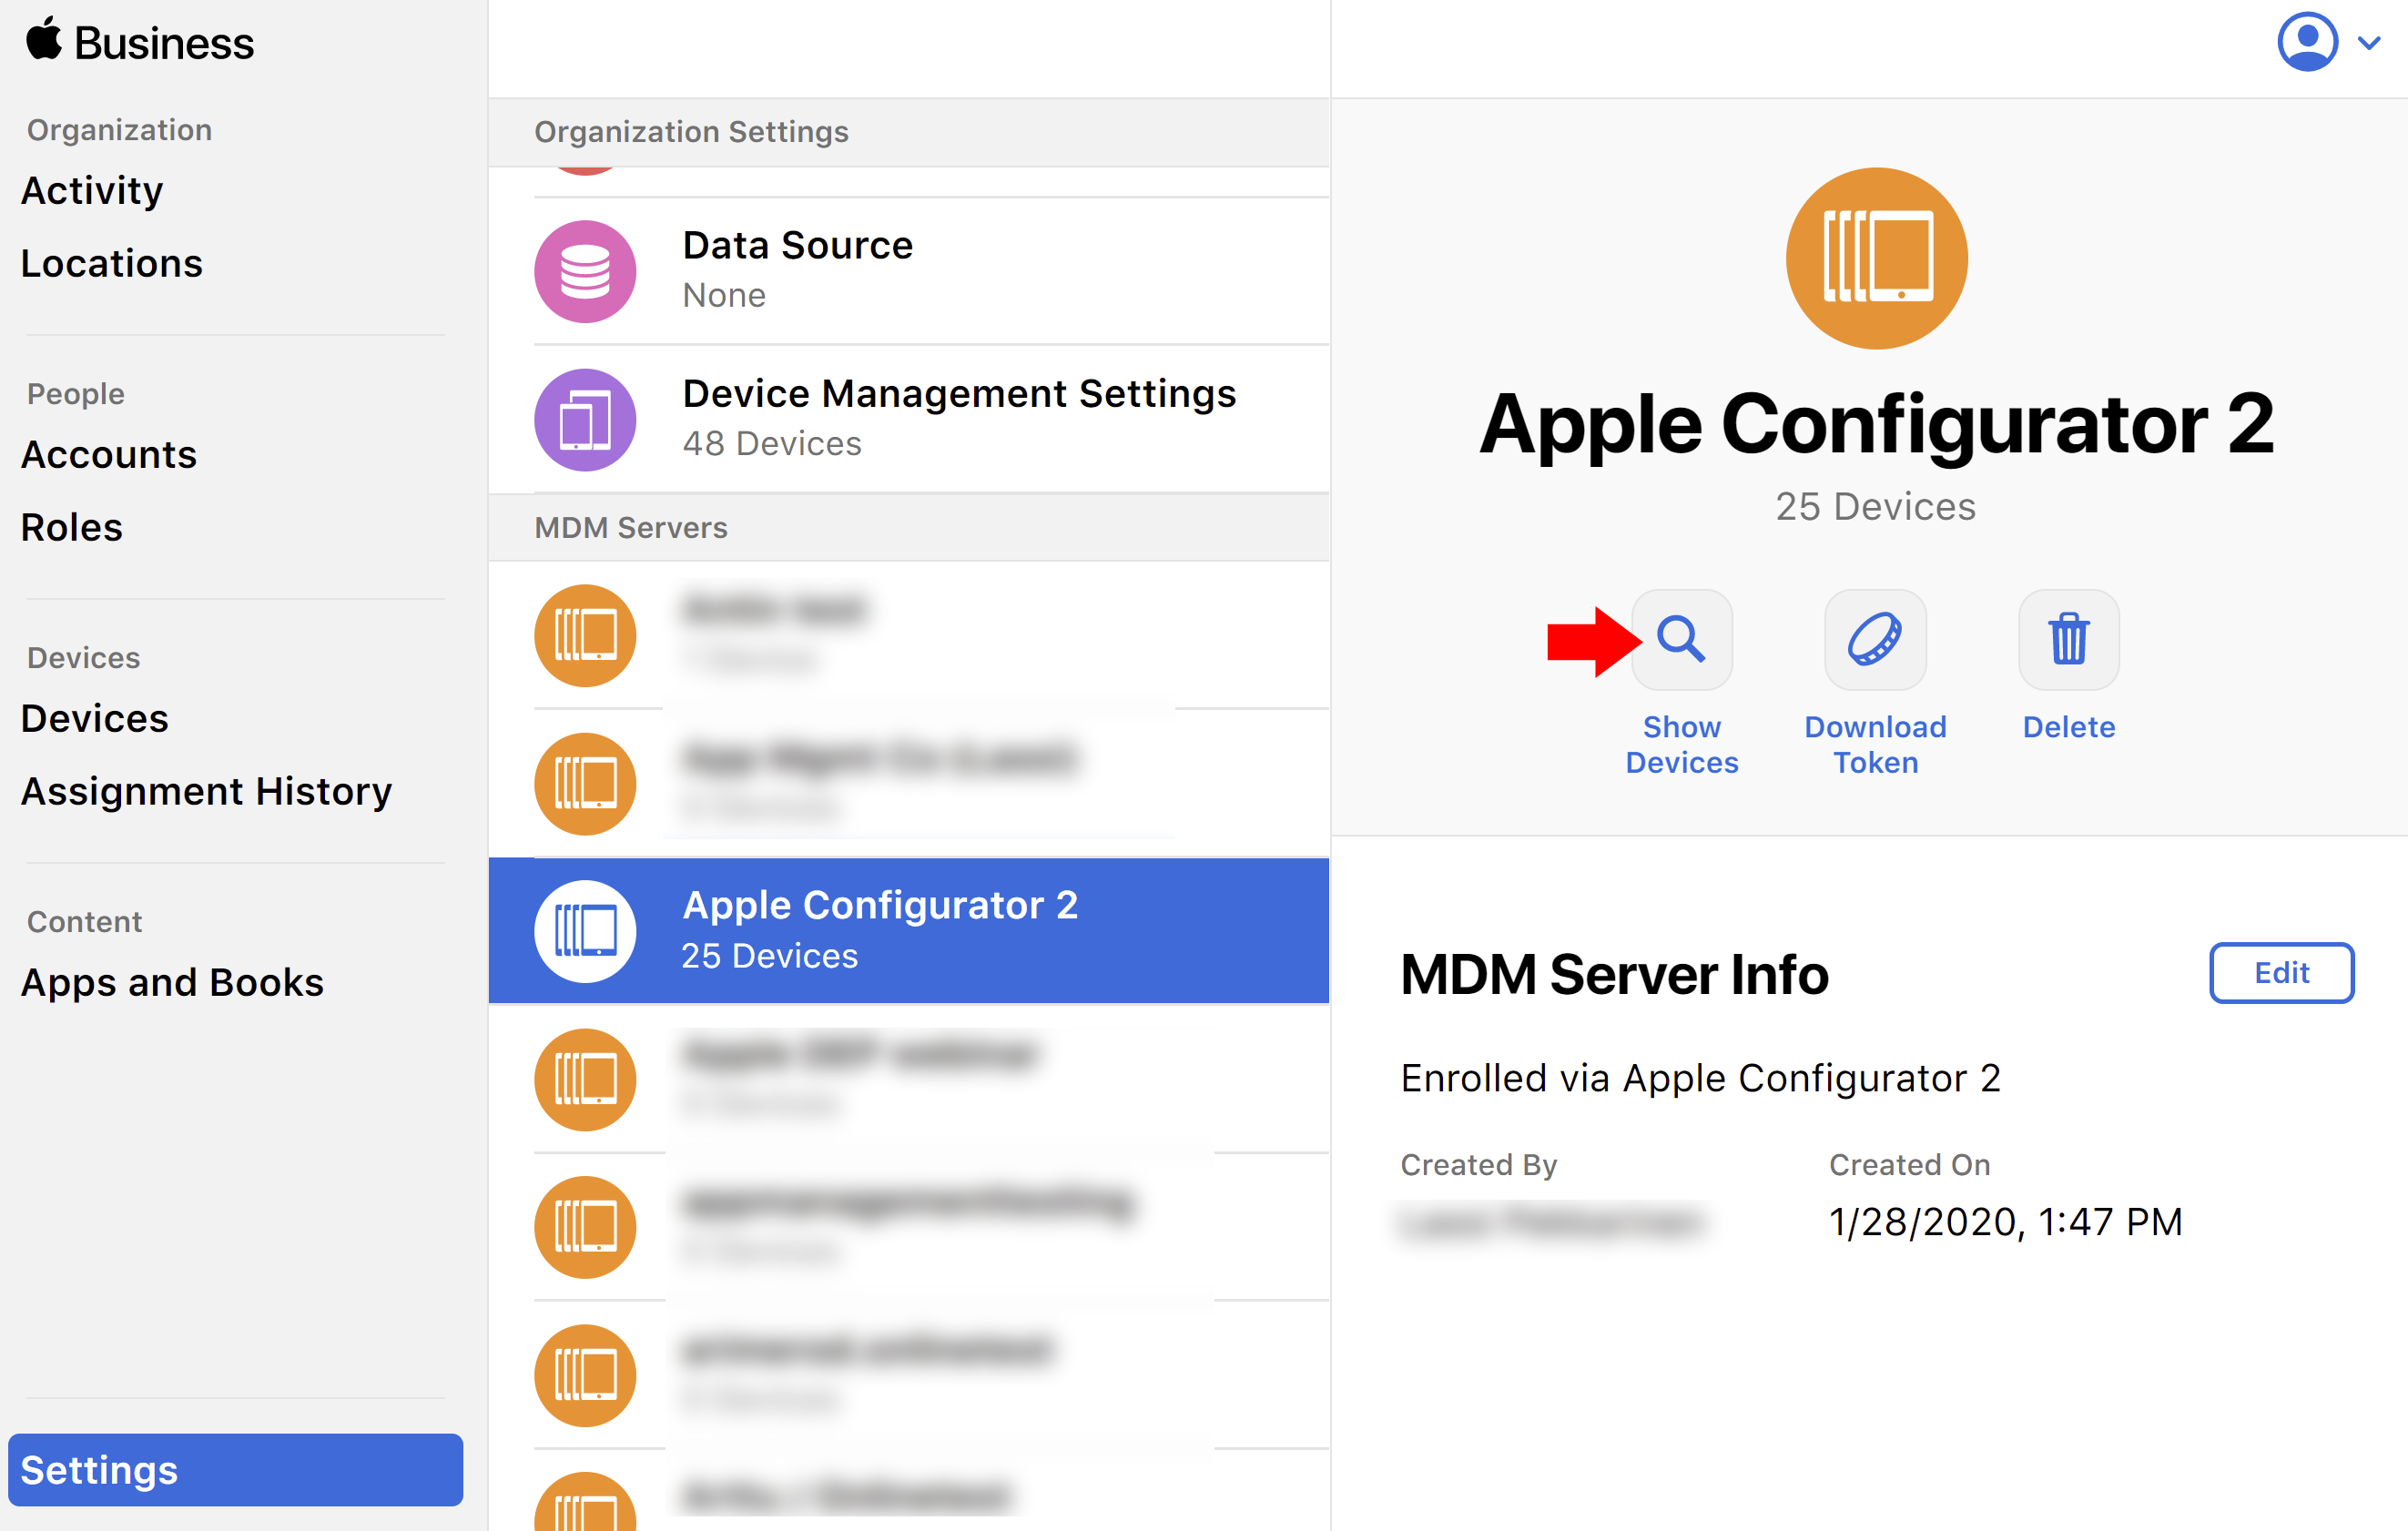 Devices that have been added to Apple Business Manager via Apple Configurator 2.